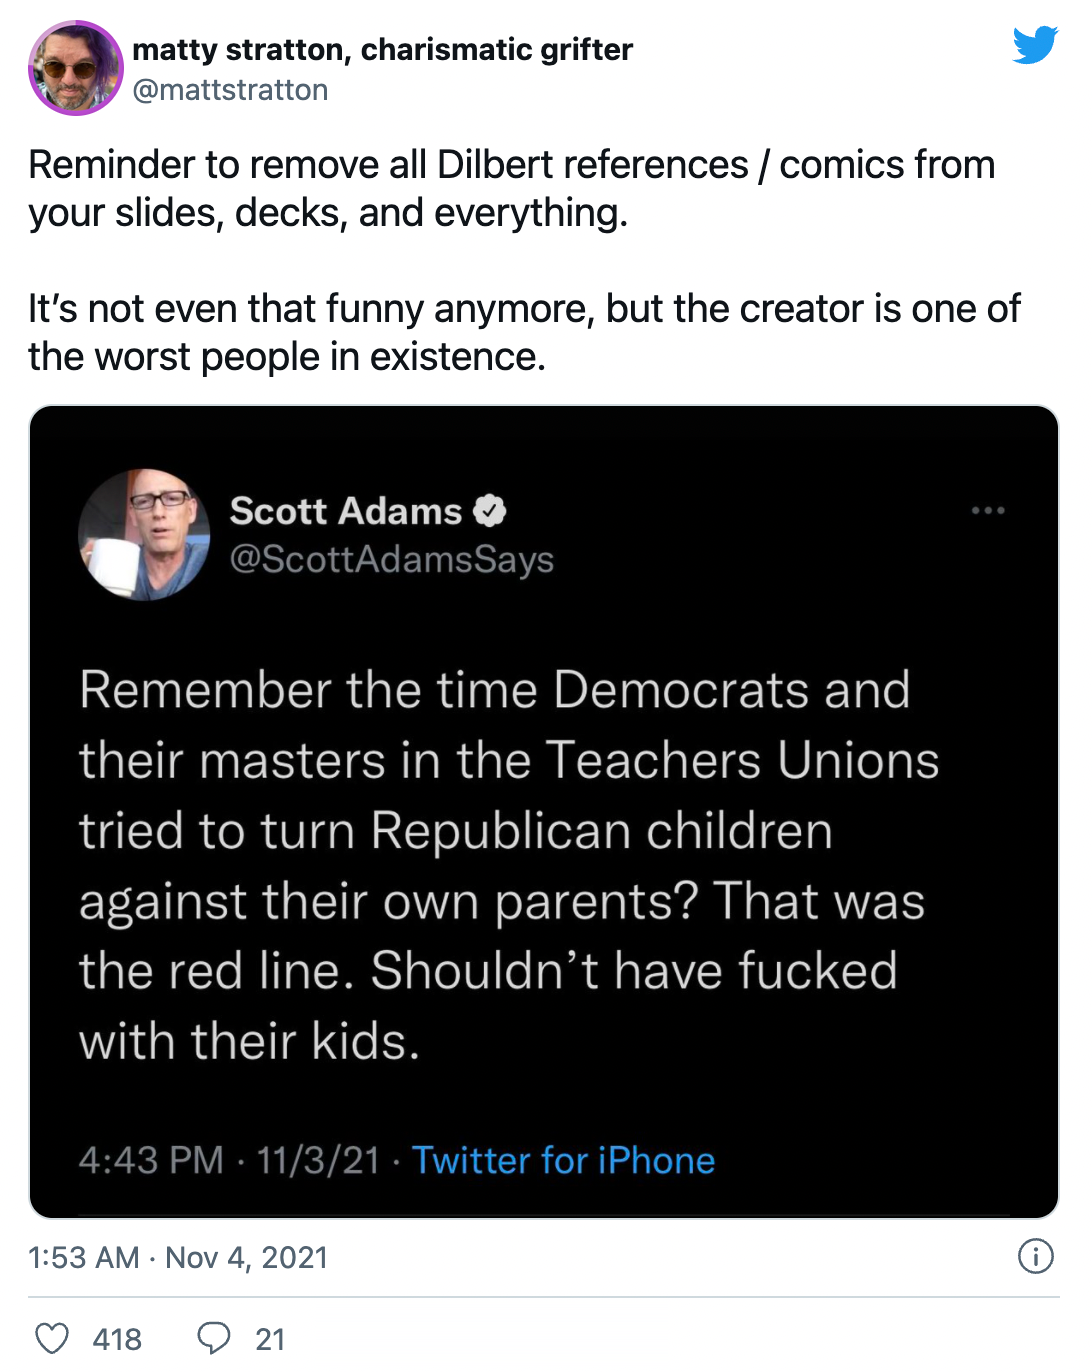 matty stratton, charismatic grifter (@mattstratton) on Twitter) &ldquo;Reminder to remove all Dilbert references / comics from your slides, decks, and everything. It&rsquo;s not even that funny anymore, but the creator is one of the worst people in existence.&rdquo;